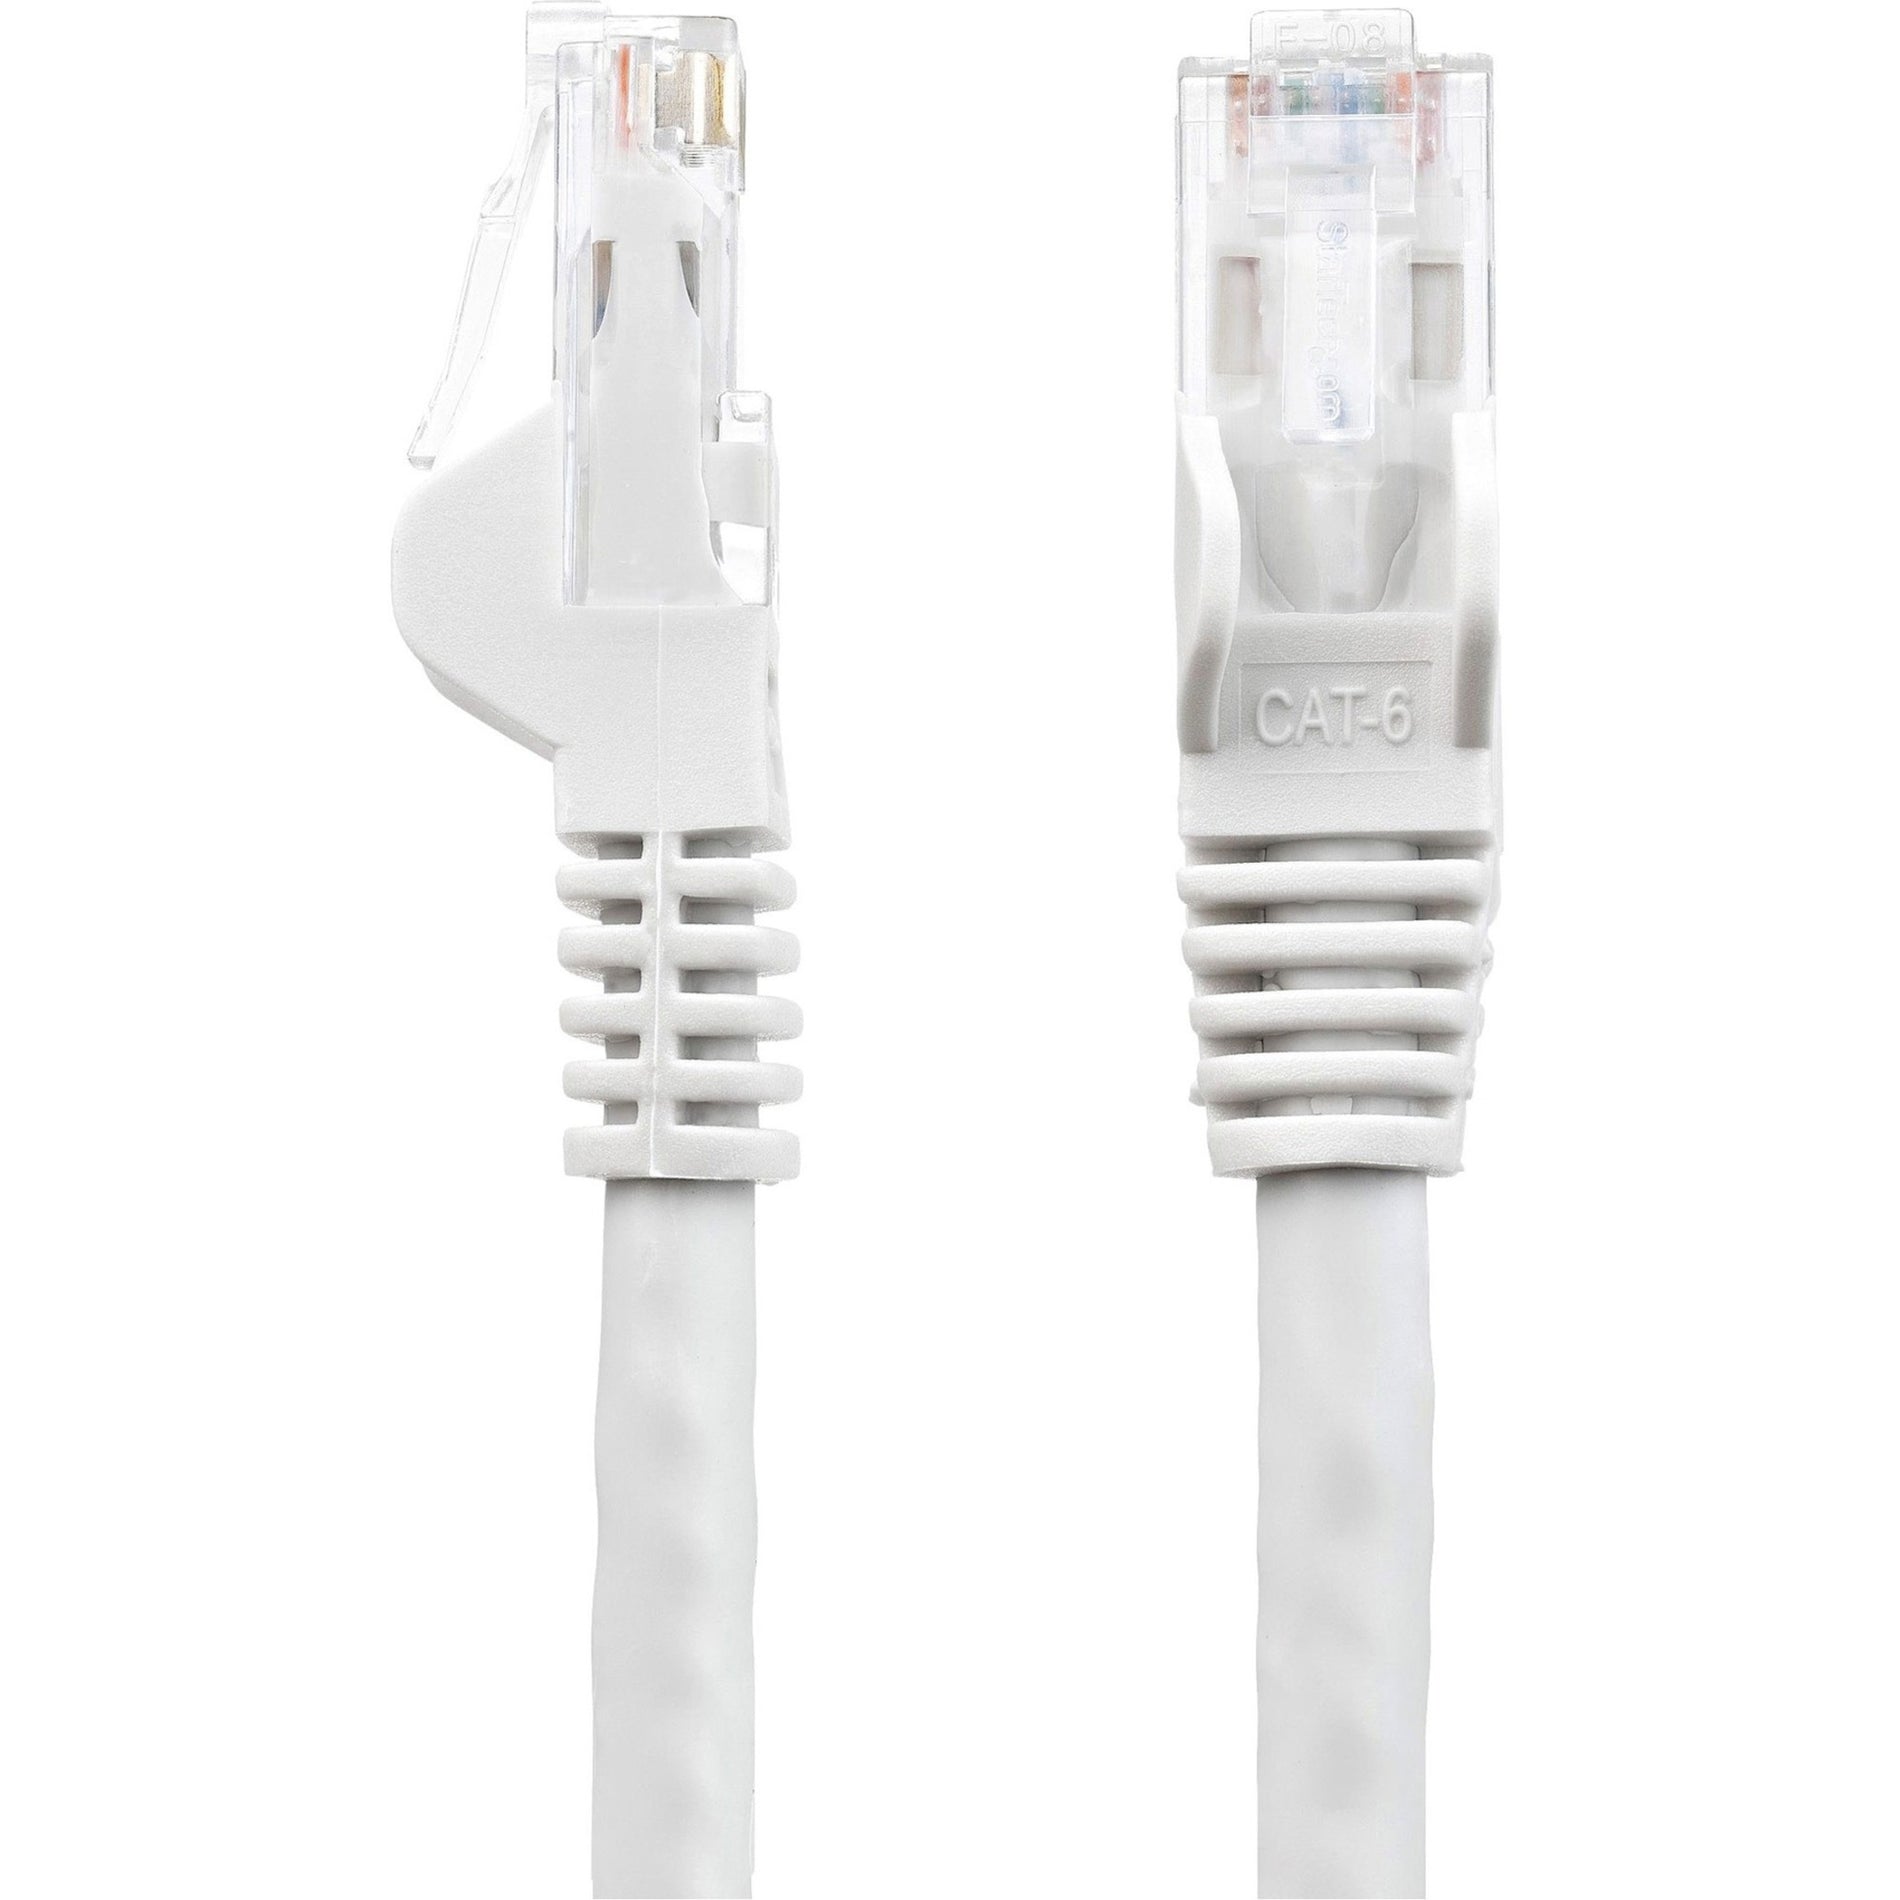 StarTech.com N6PATCH100WH 100 ft White Snagless Cat6 UTP Patch Cable, Lifetime Warranty, Corrosion Resistant, Easy Cable Routing